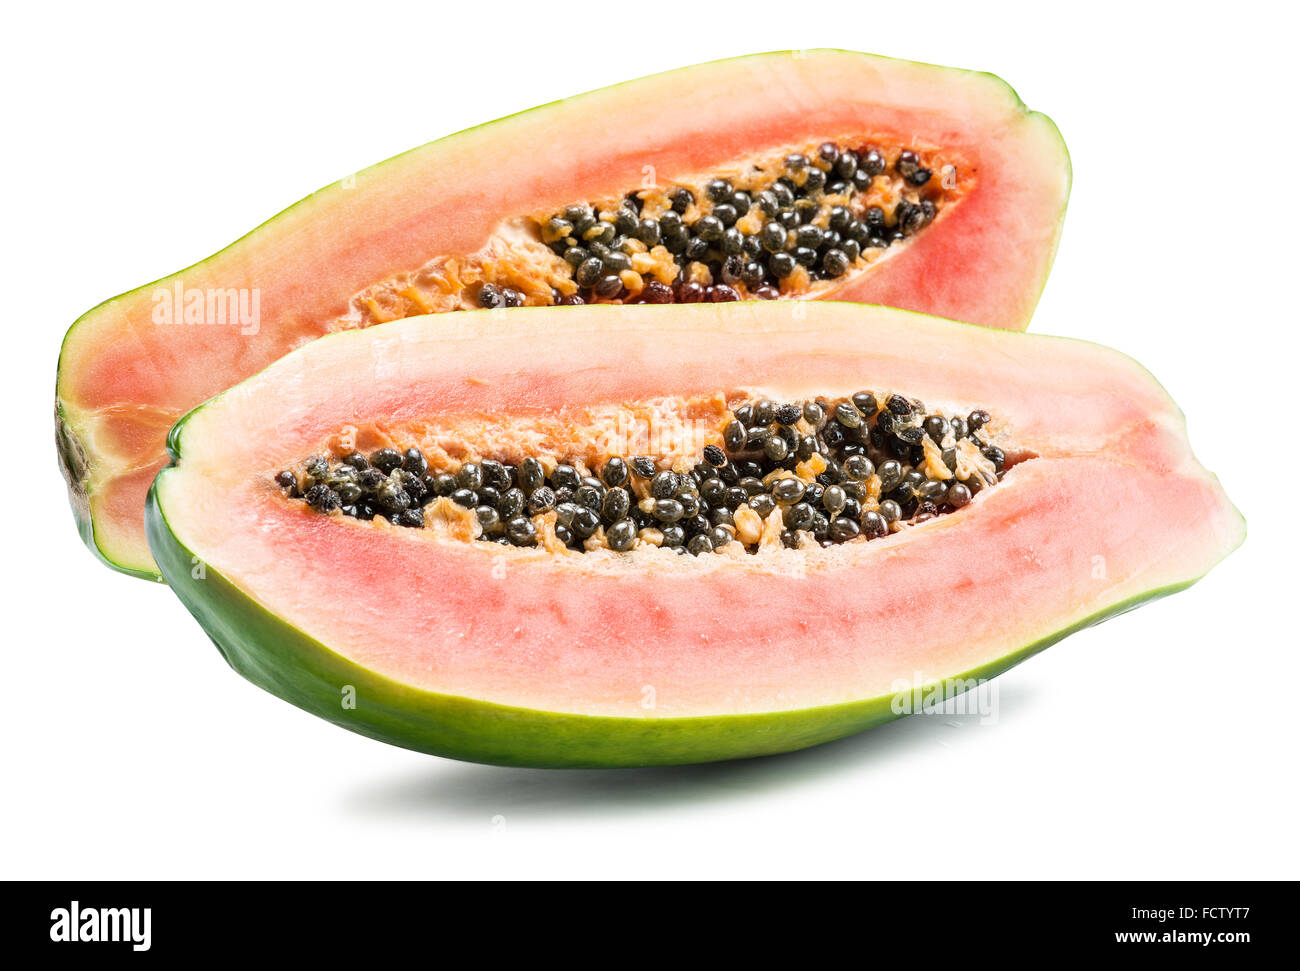 Papaya fruit isolated on a white background. File contains clipping paths. Stock Photo